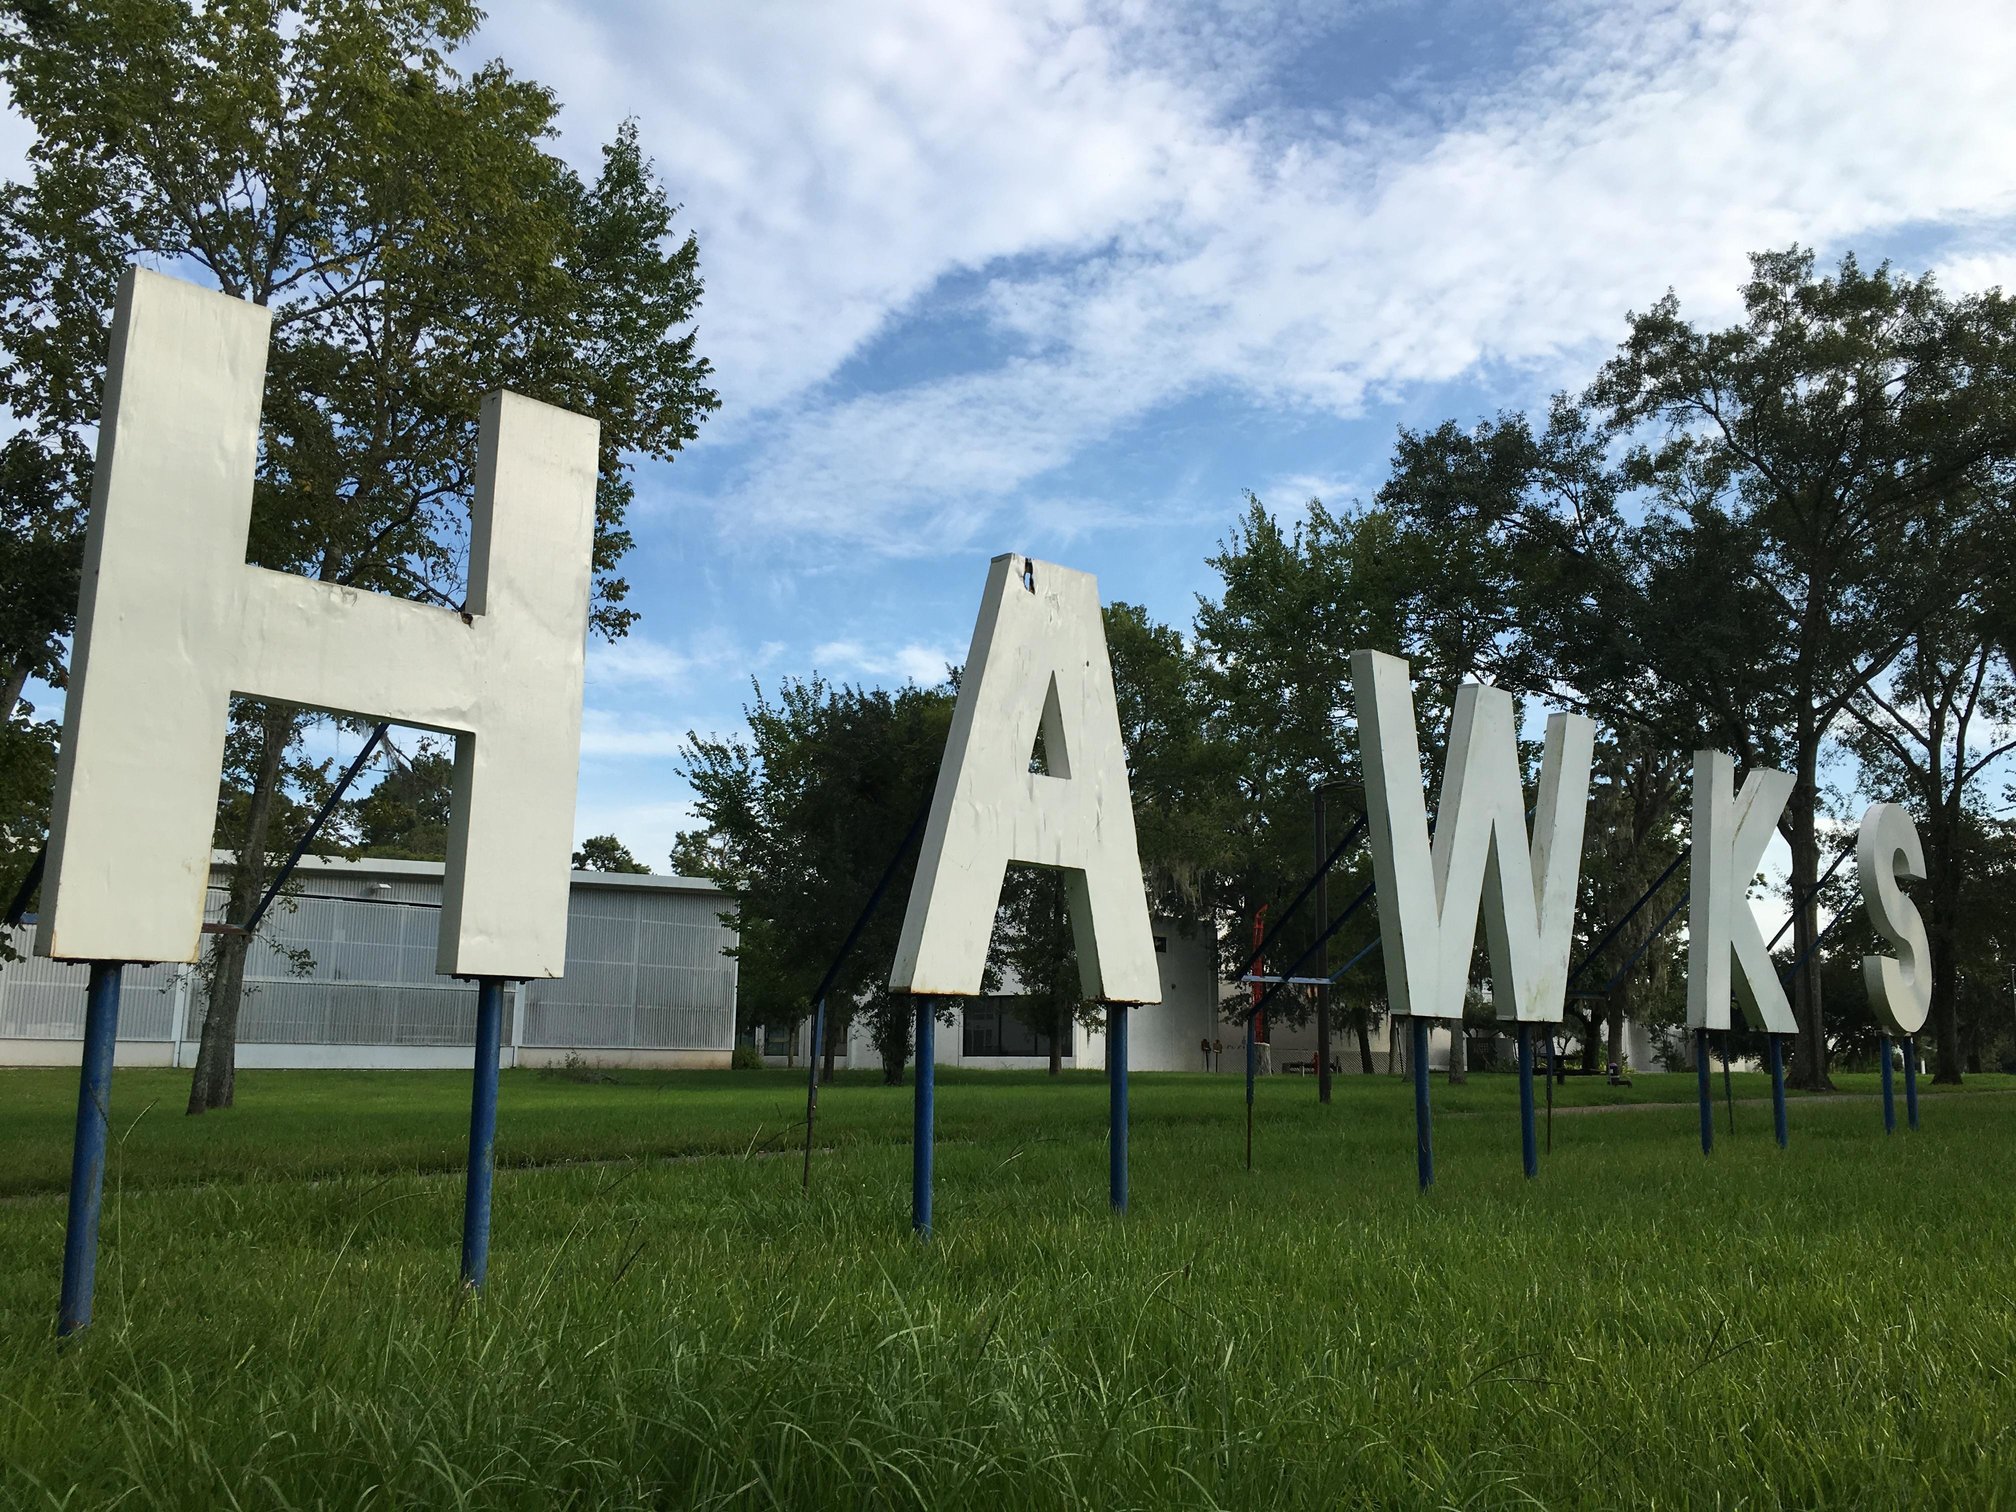 PHOTO: Hawks signage at entrance of UHCL. Photo by The Signal reporter Demetria Ledesma.